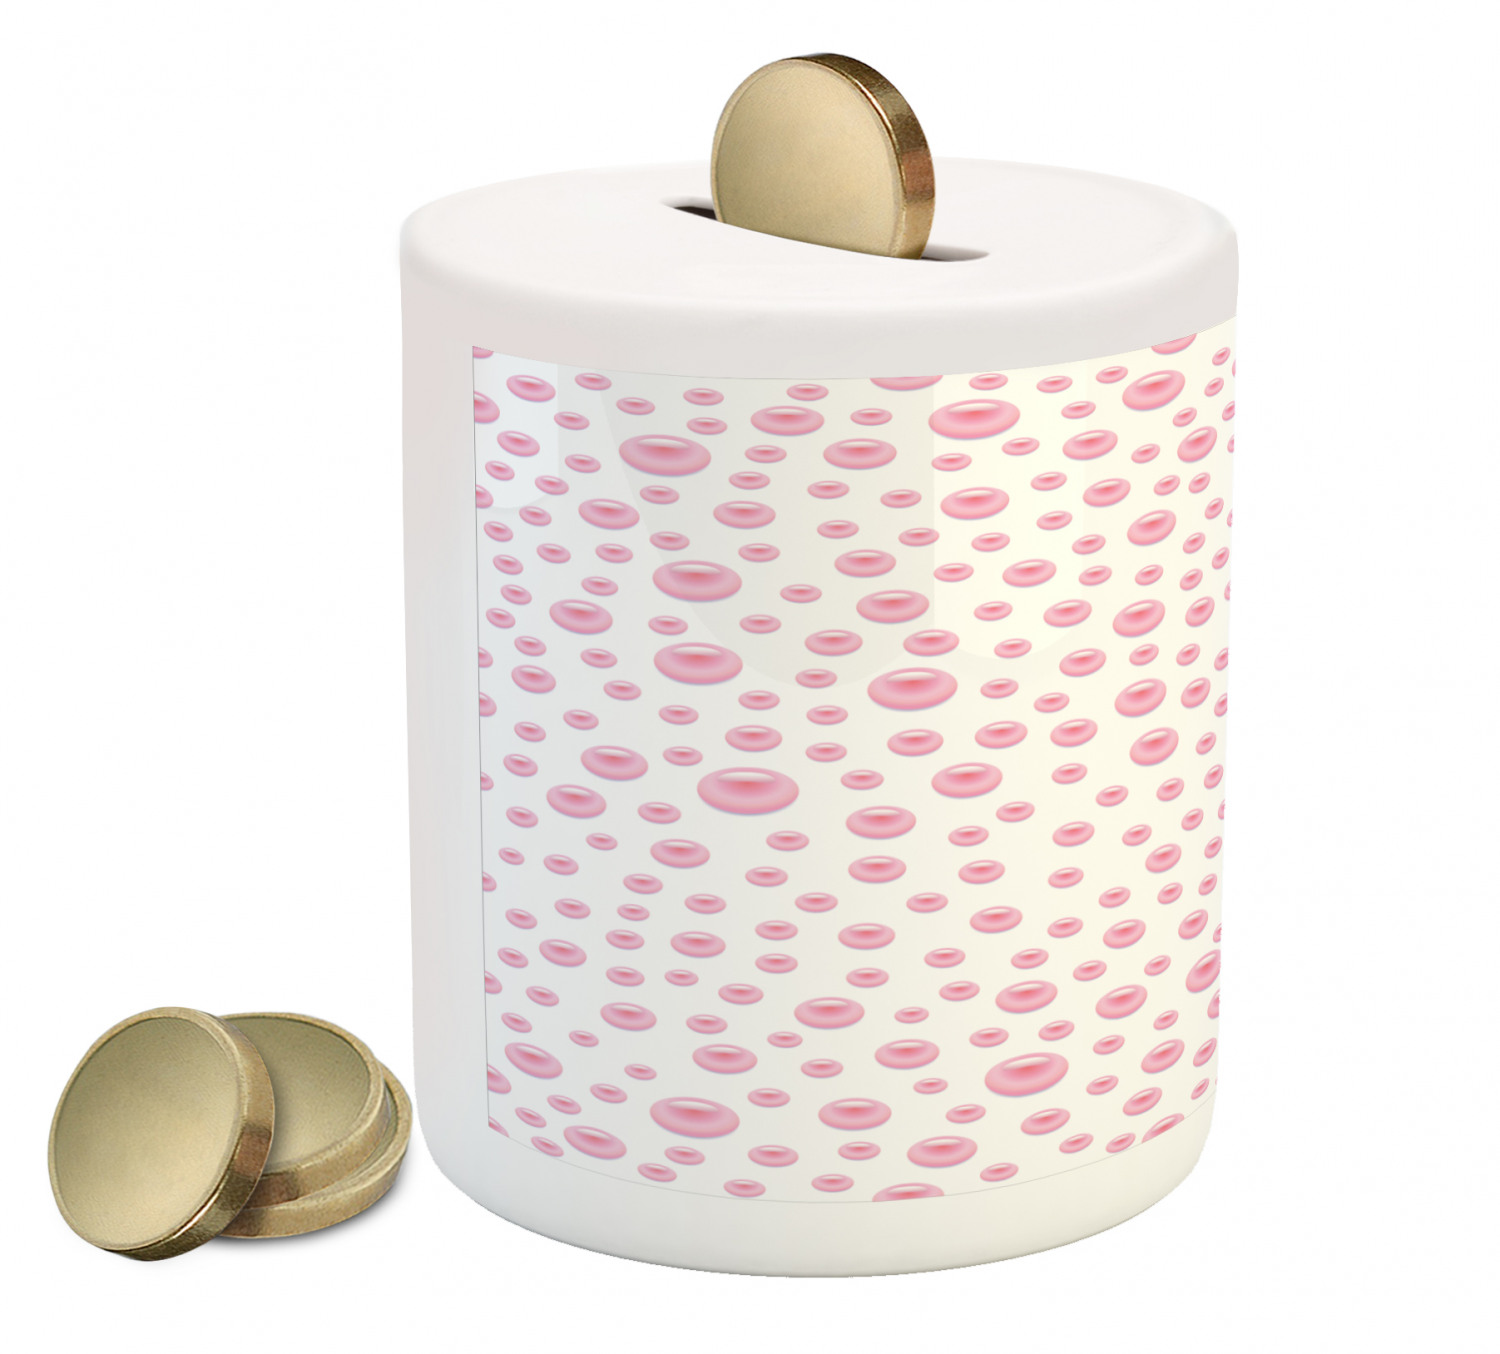 Pearls Piggy Bank, Pattern with Large Small Pink Color Pearls Precious Stones Bridal Print, Ceramic Coin Bank Money Box for Cash Saving, 3.6" X 3.2", White Pink, by Ambesonne - image 2 of 4